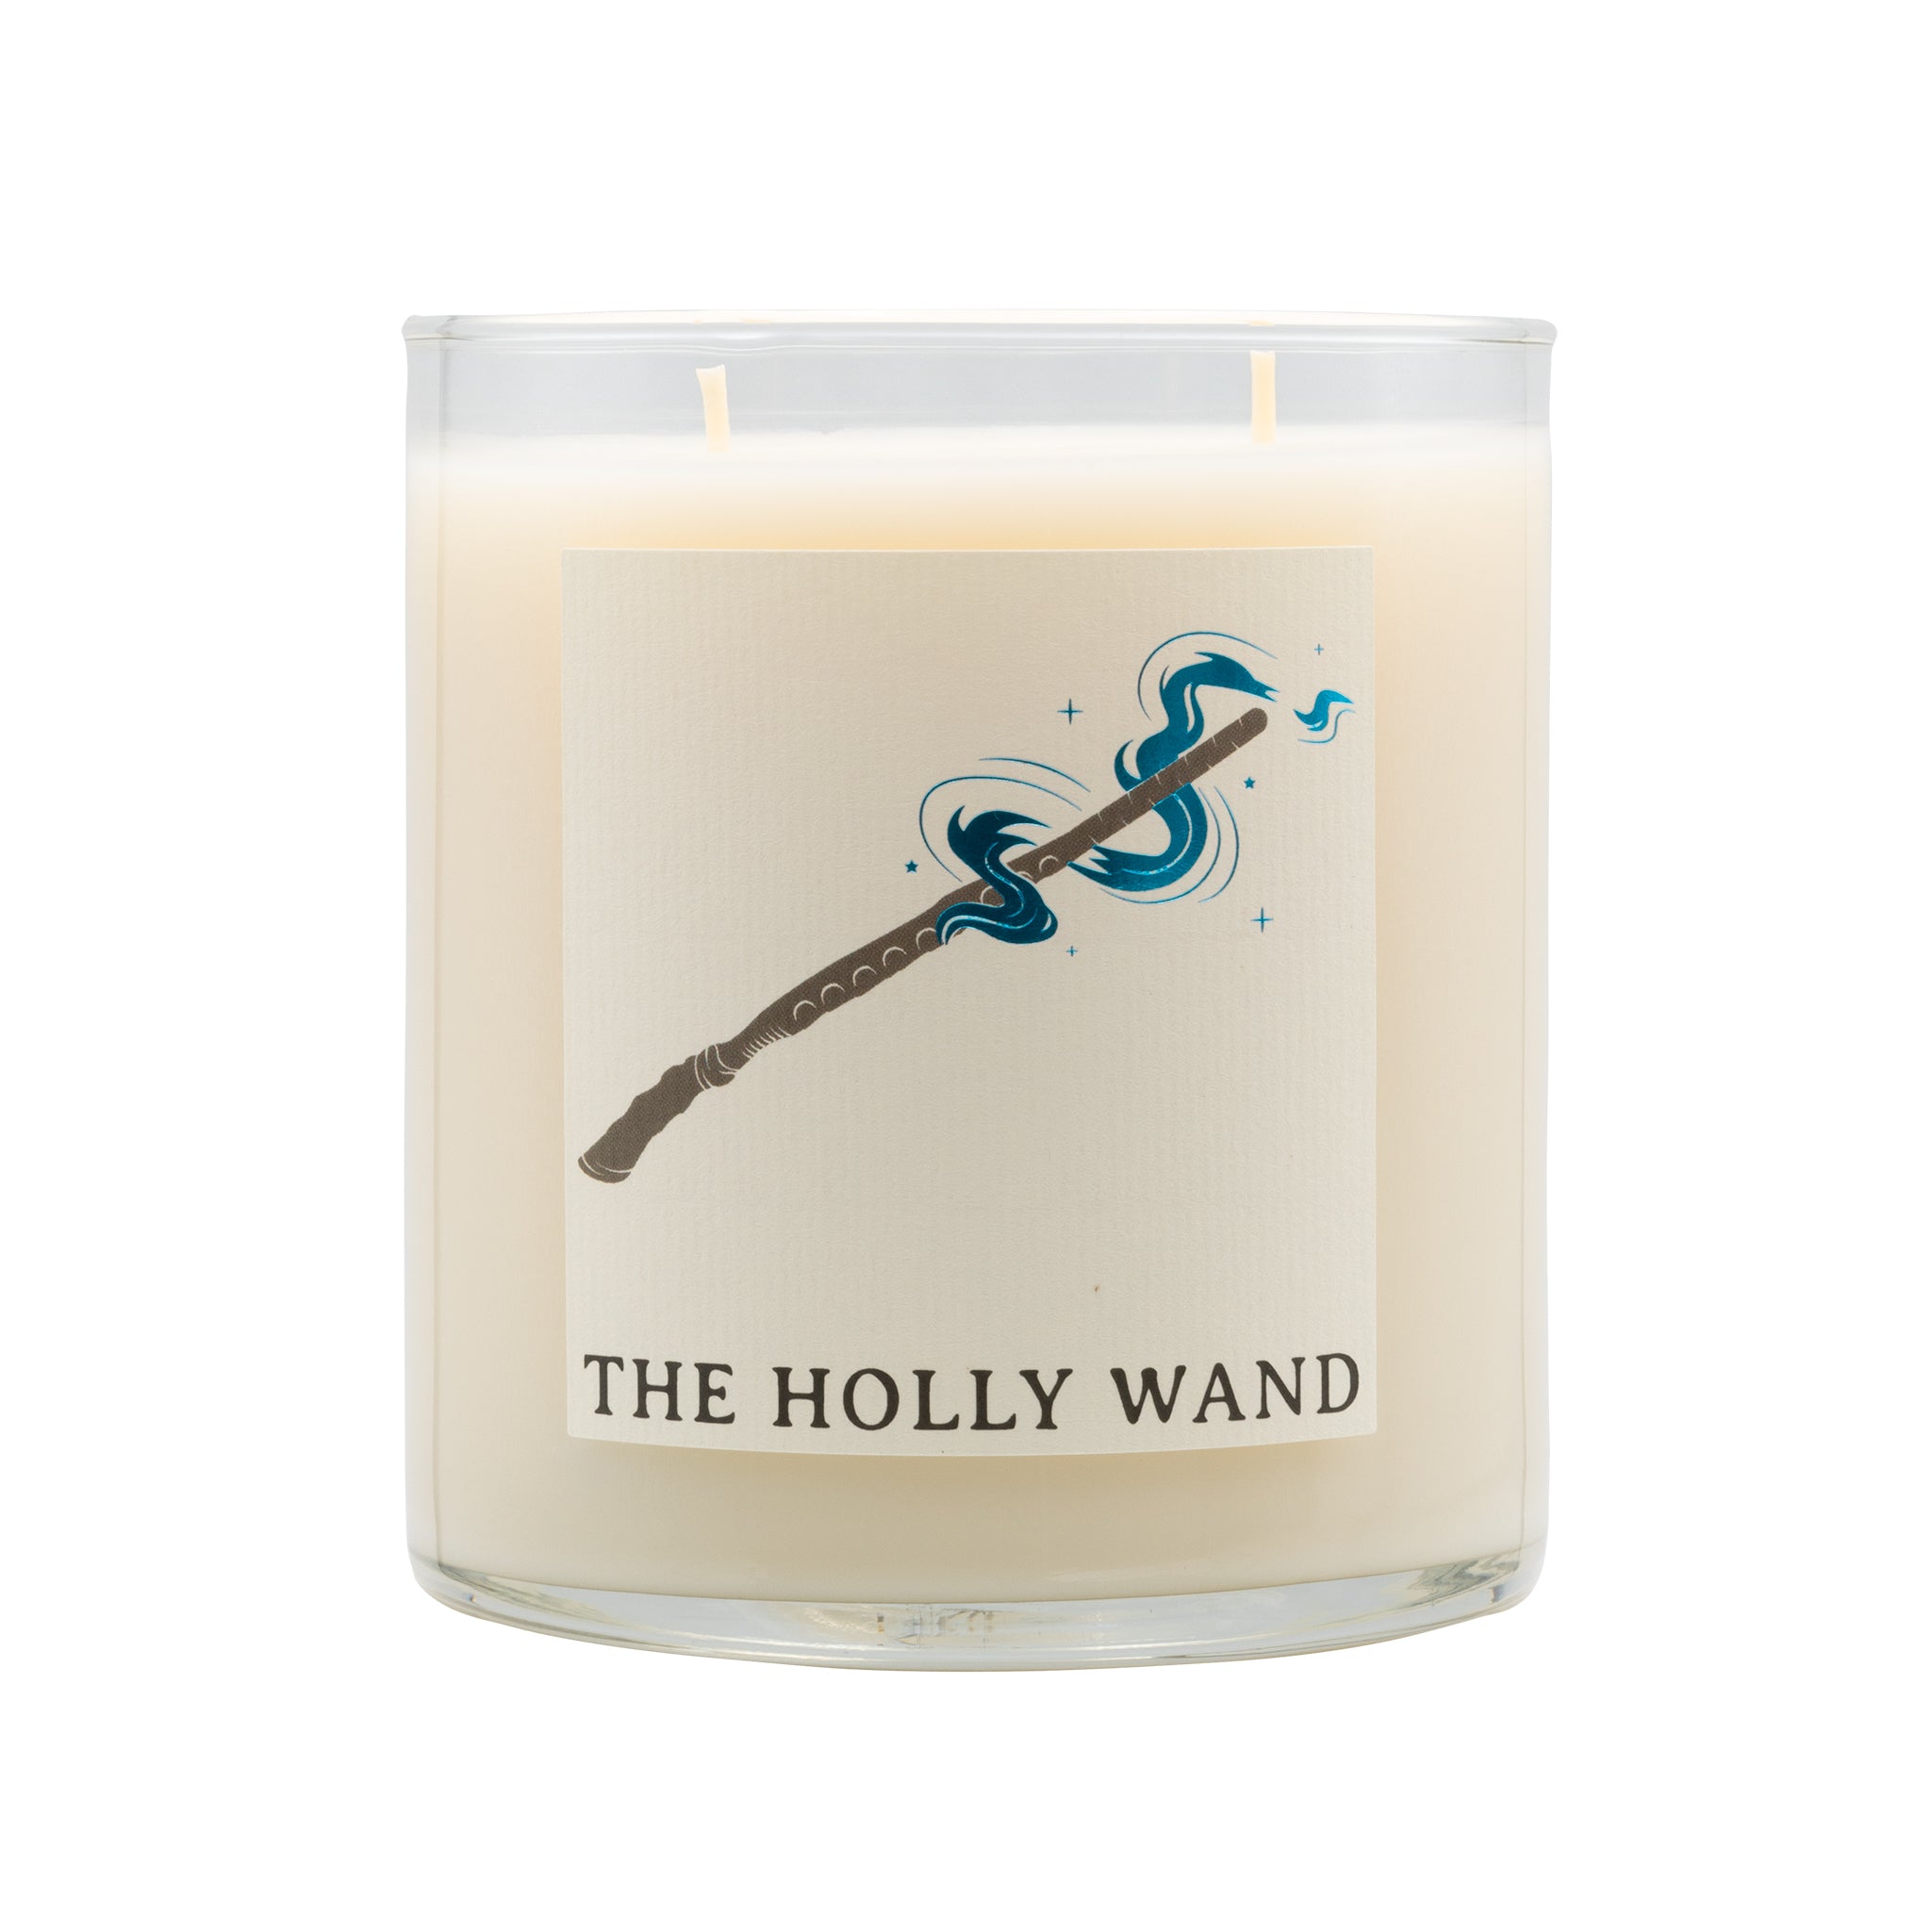 Holly Wand Super Carlin Brother's Mercantile Wizarding Candle Club